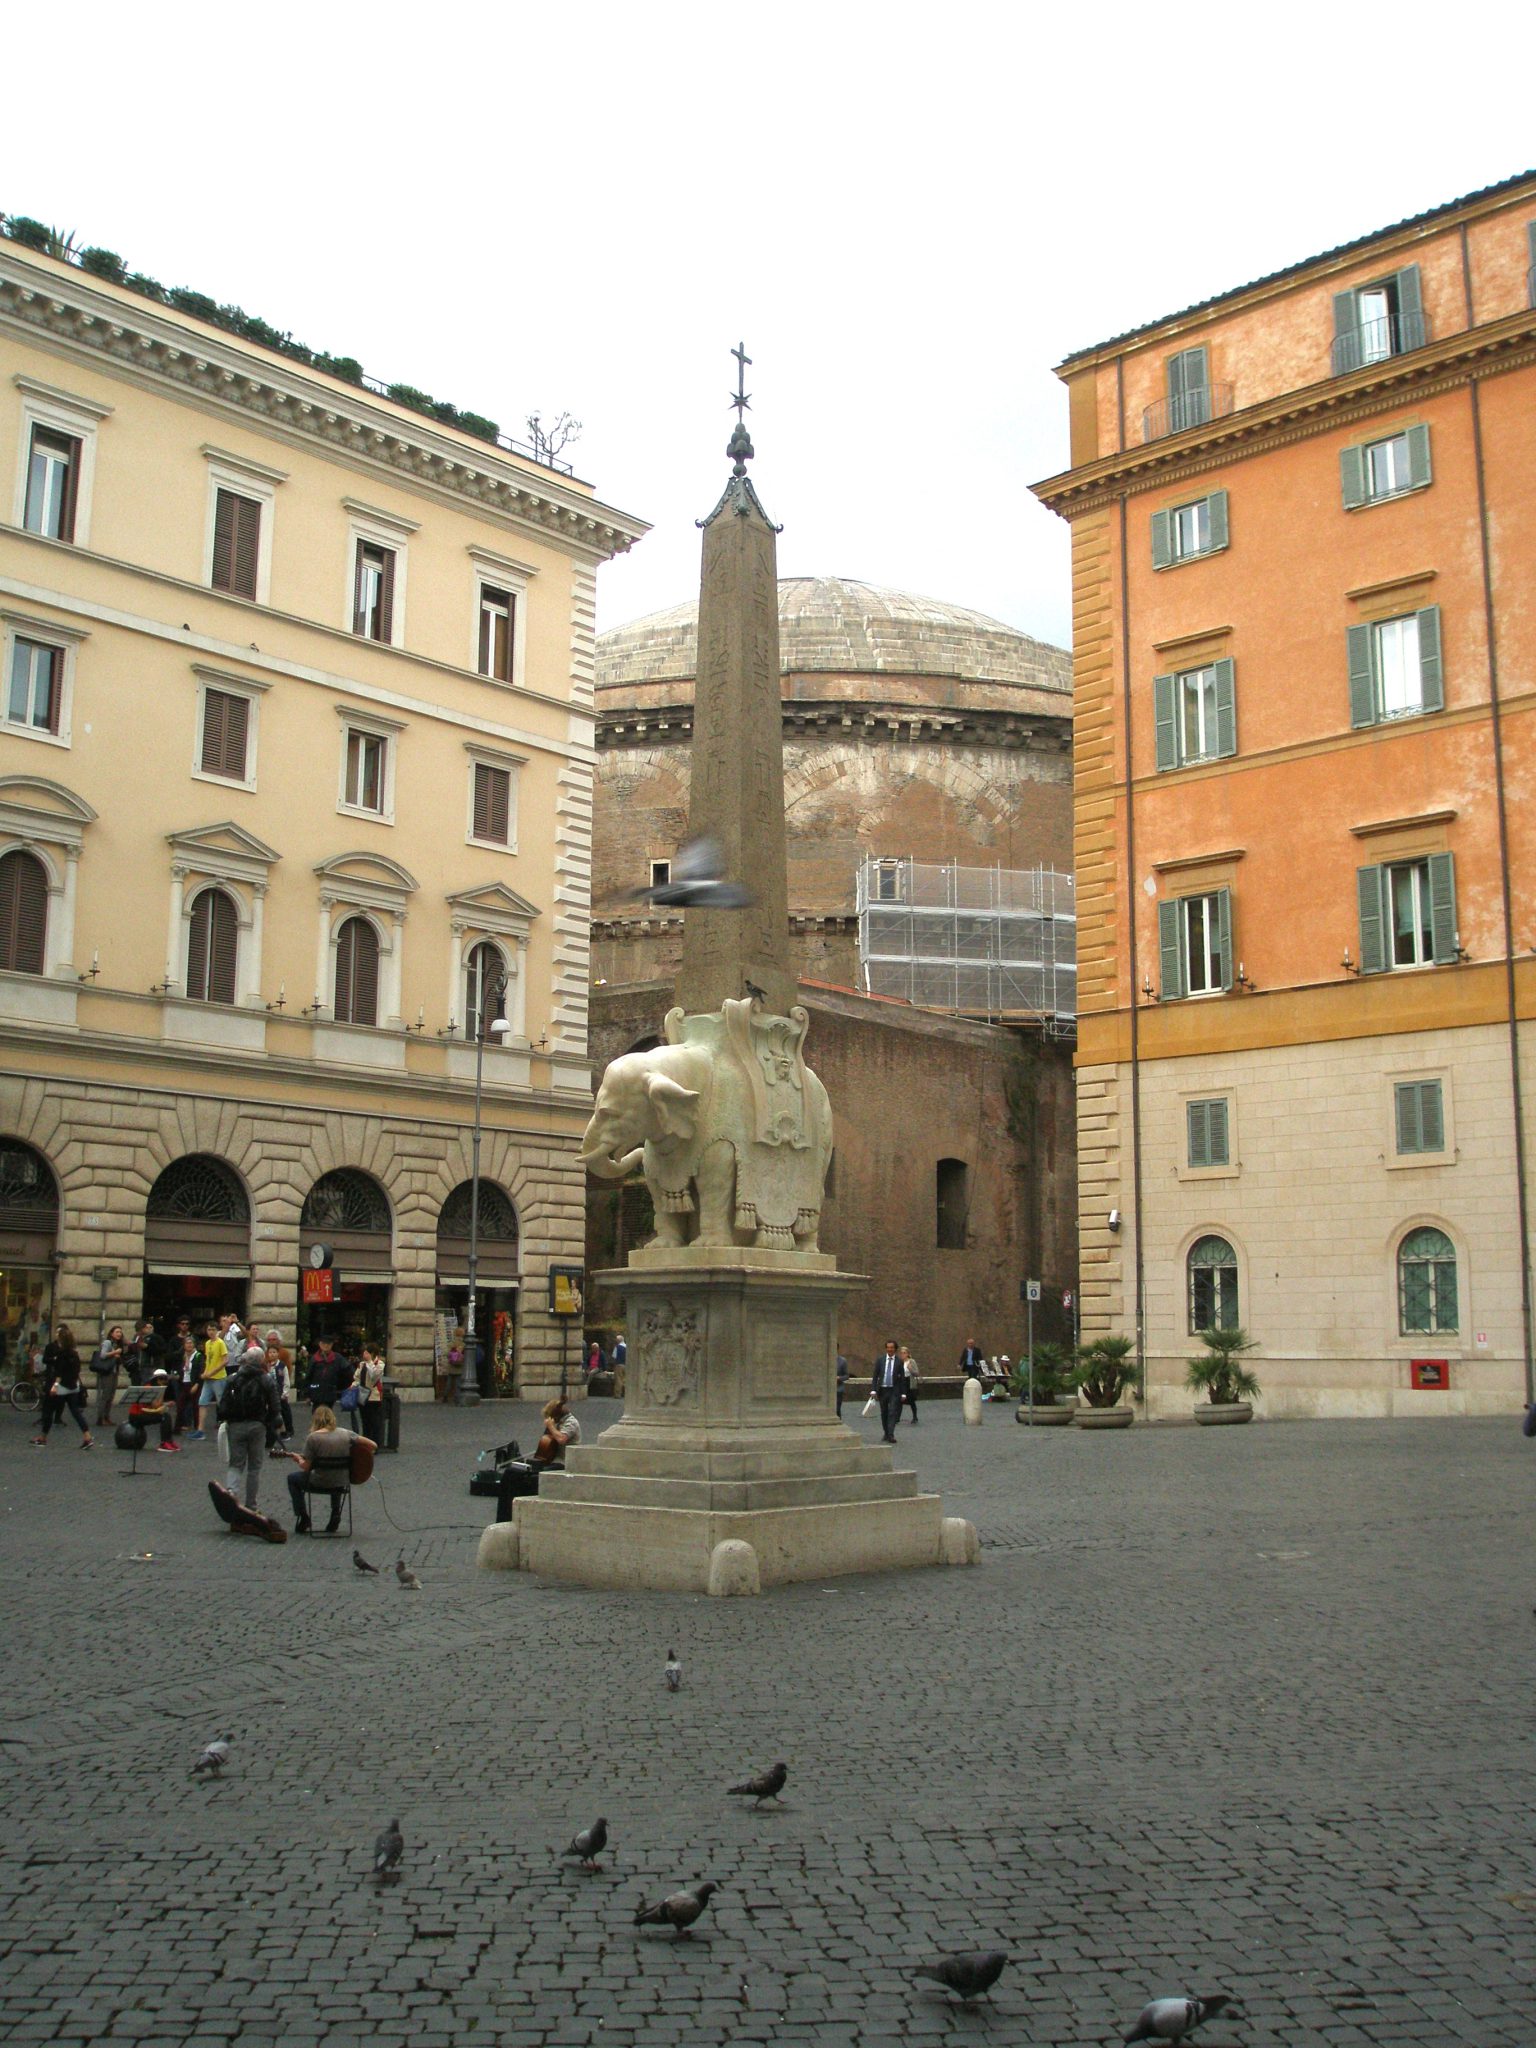 The Elefantino...as rain began to sprinkle down upon the Piazza della Minerva. The dome of the Pantheon looms in the background.